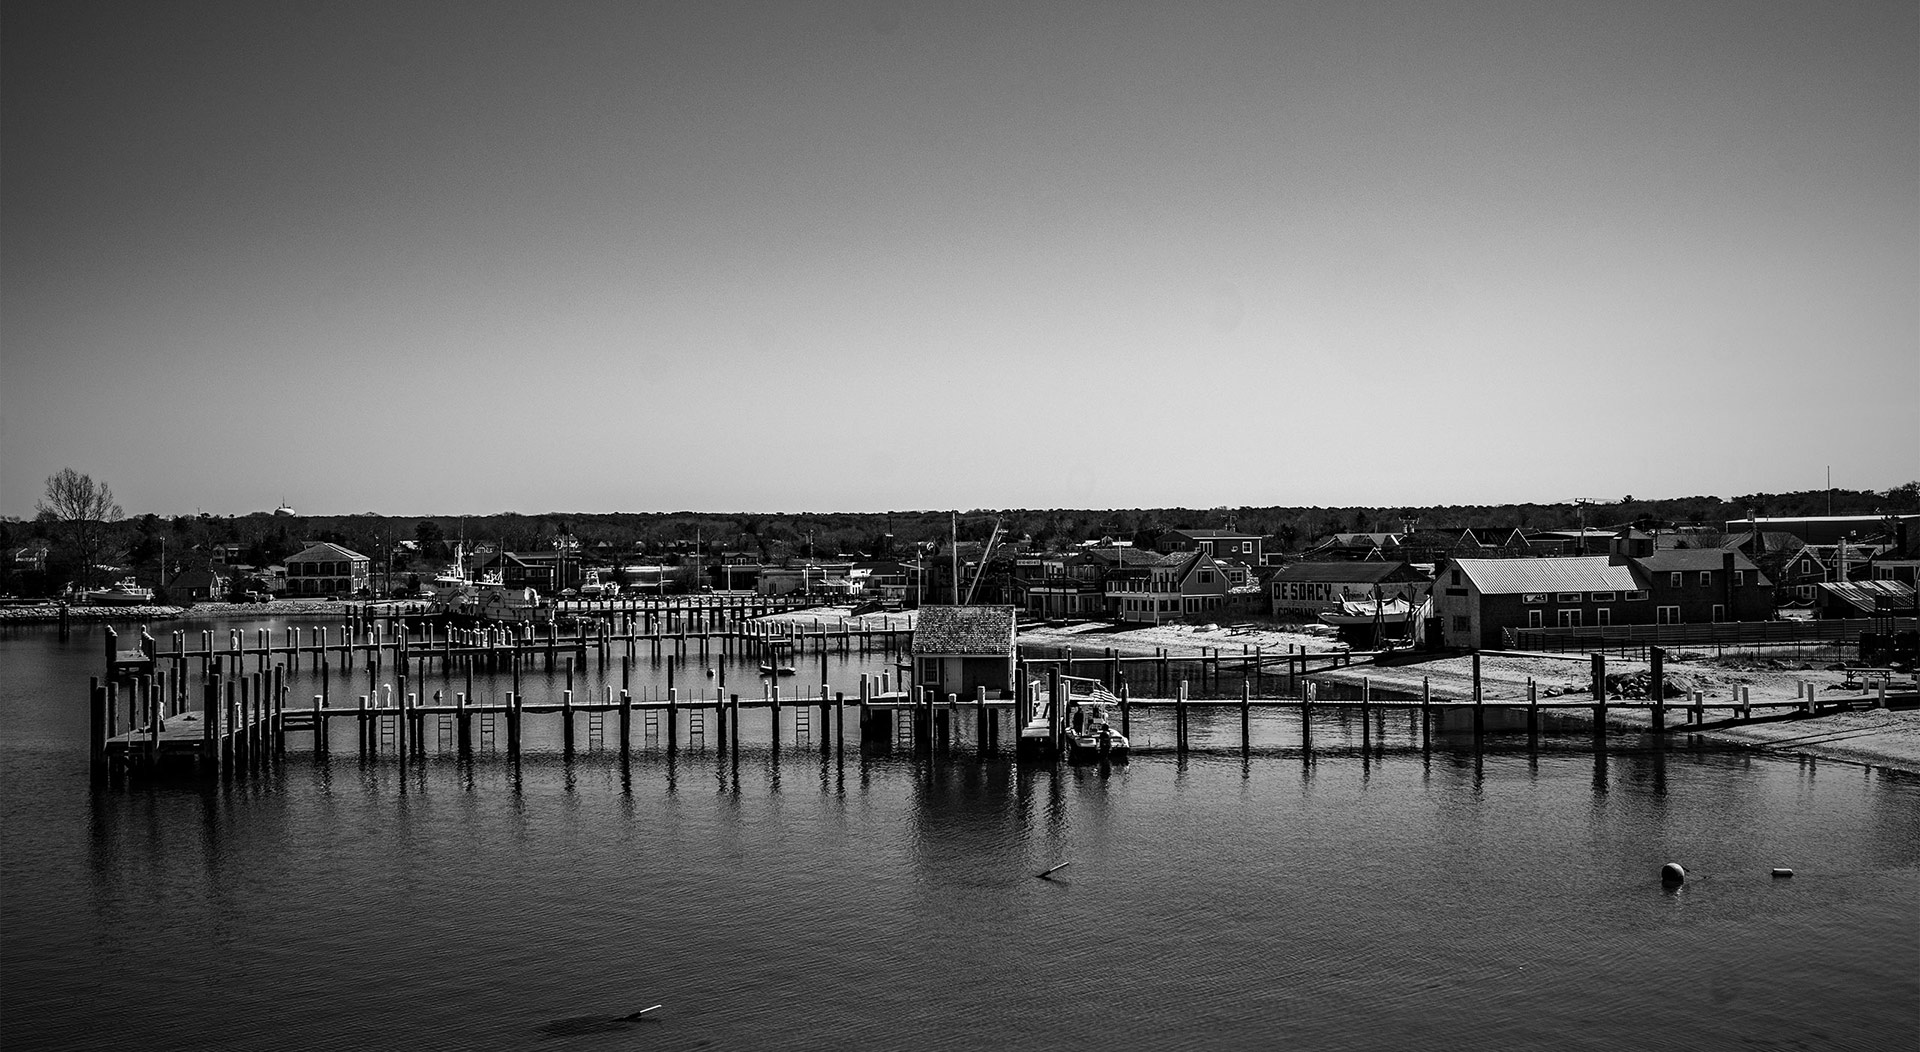 Vineyard Haven on Martha's Vineyard, Ma, from the ferry ©2021